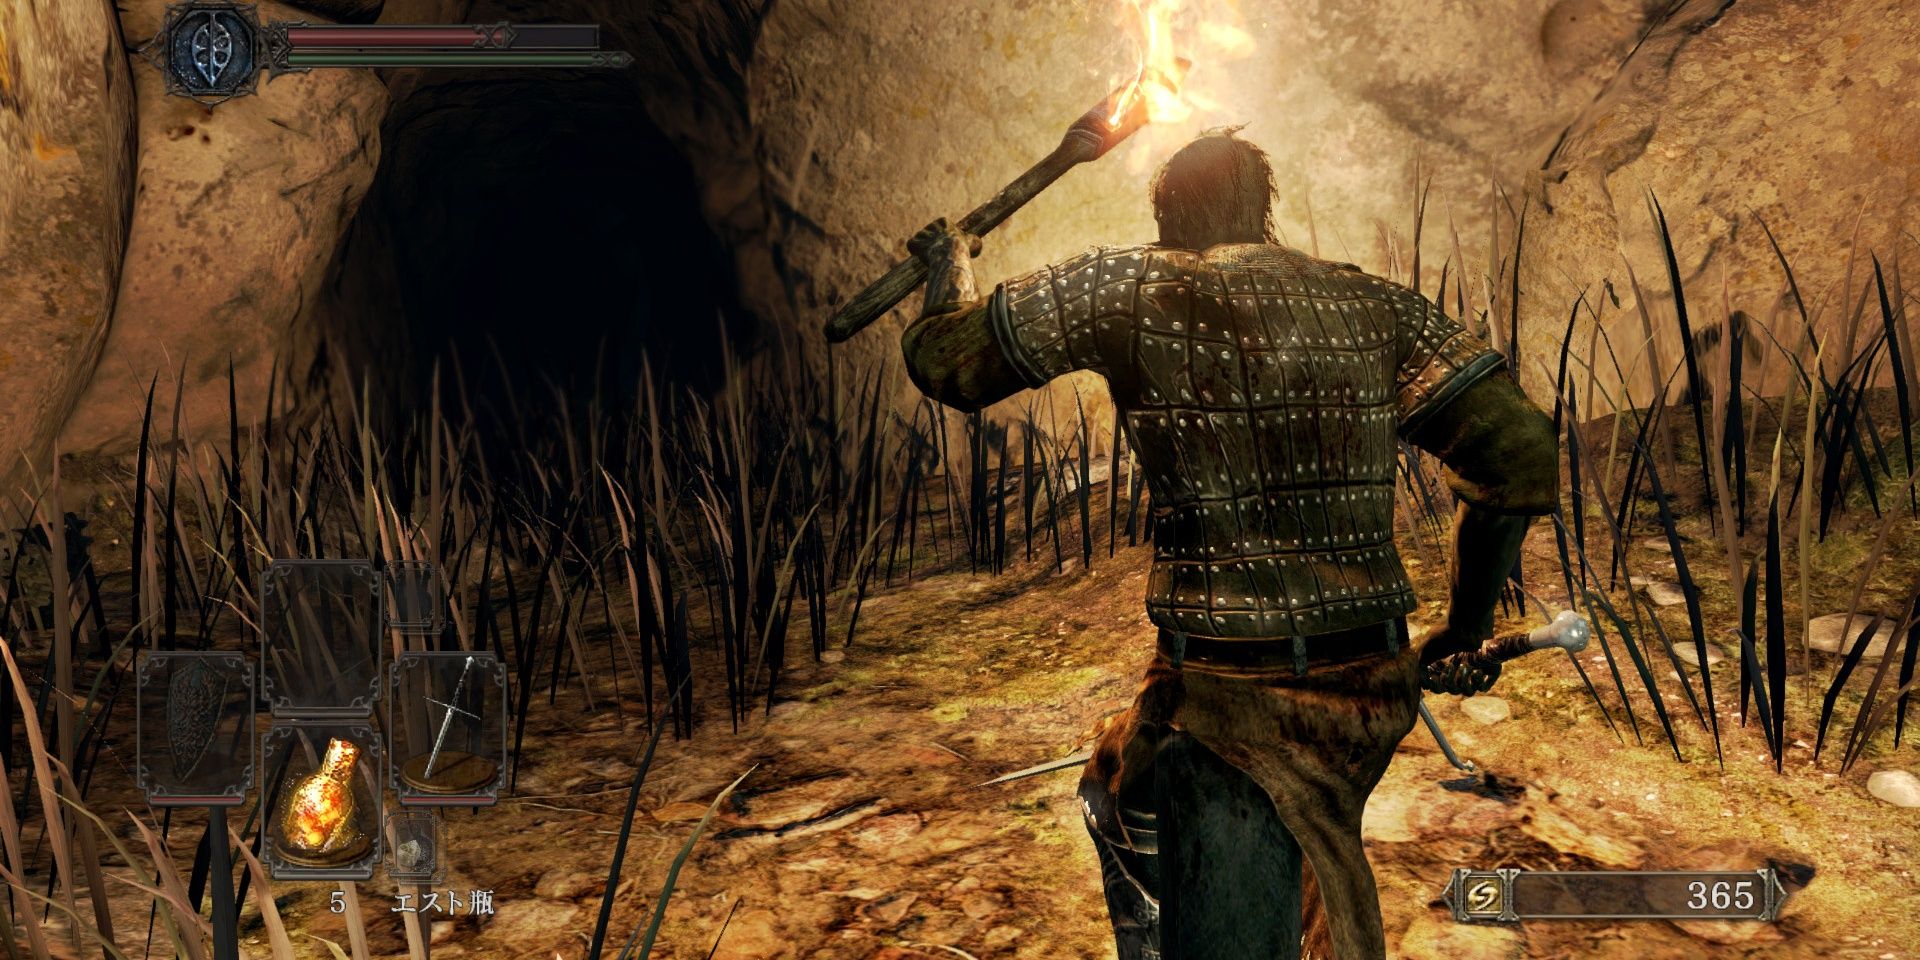 A Dark Souls 2 player using a torch